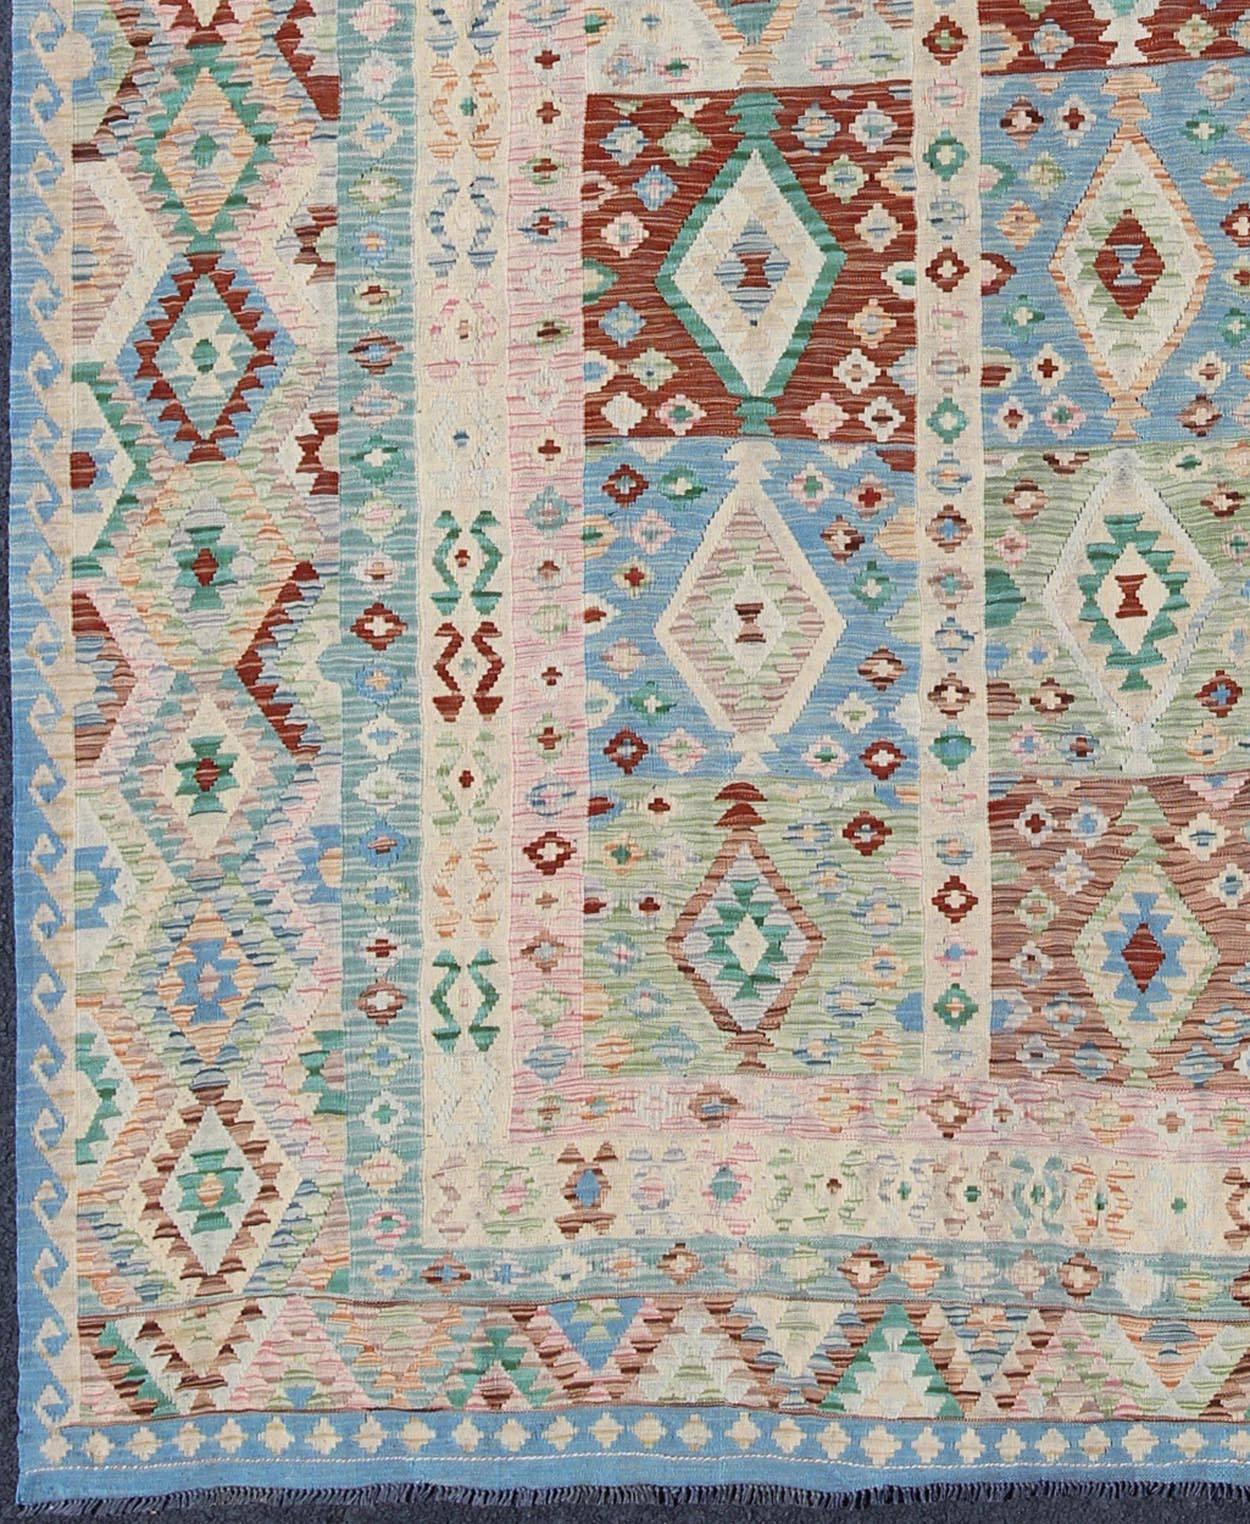 Diamond design geometric Afghan made Kilim rug in blue, green, cream, pink, rug Keivan Woven Arts / orn-30108, country of origin / type: Afghanistan / Kilim.

This flat-weave Kilim from Afghanistan bears a repeating diamond design with other